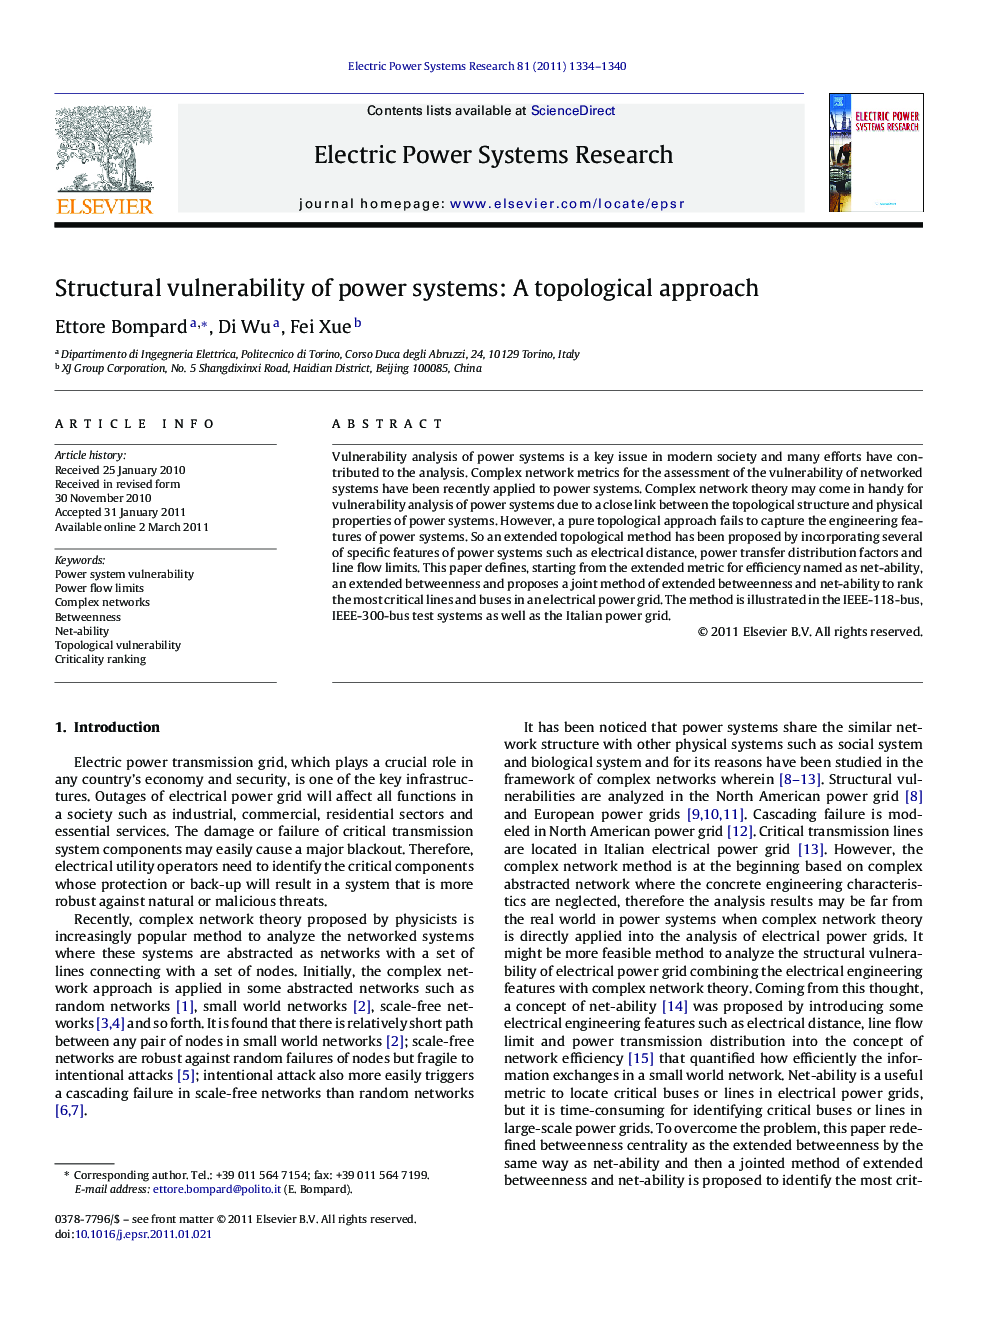 Structural vulnerability of power systems: A topological approach